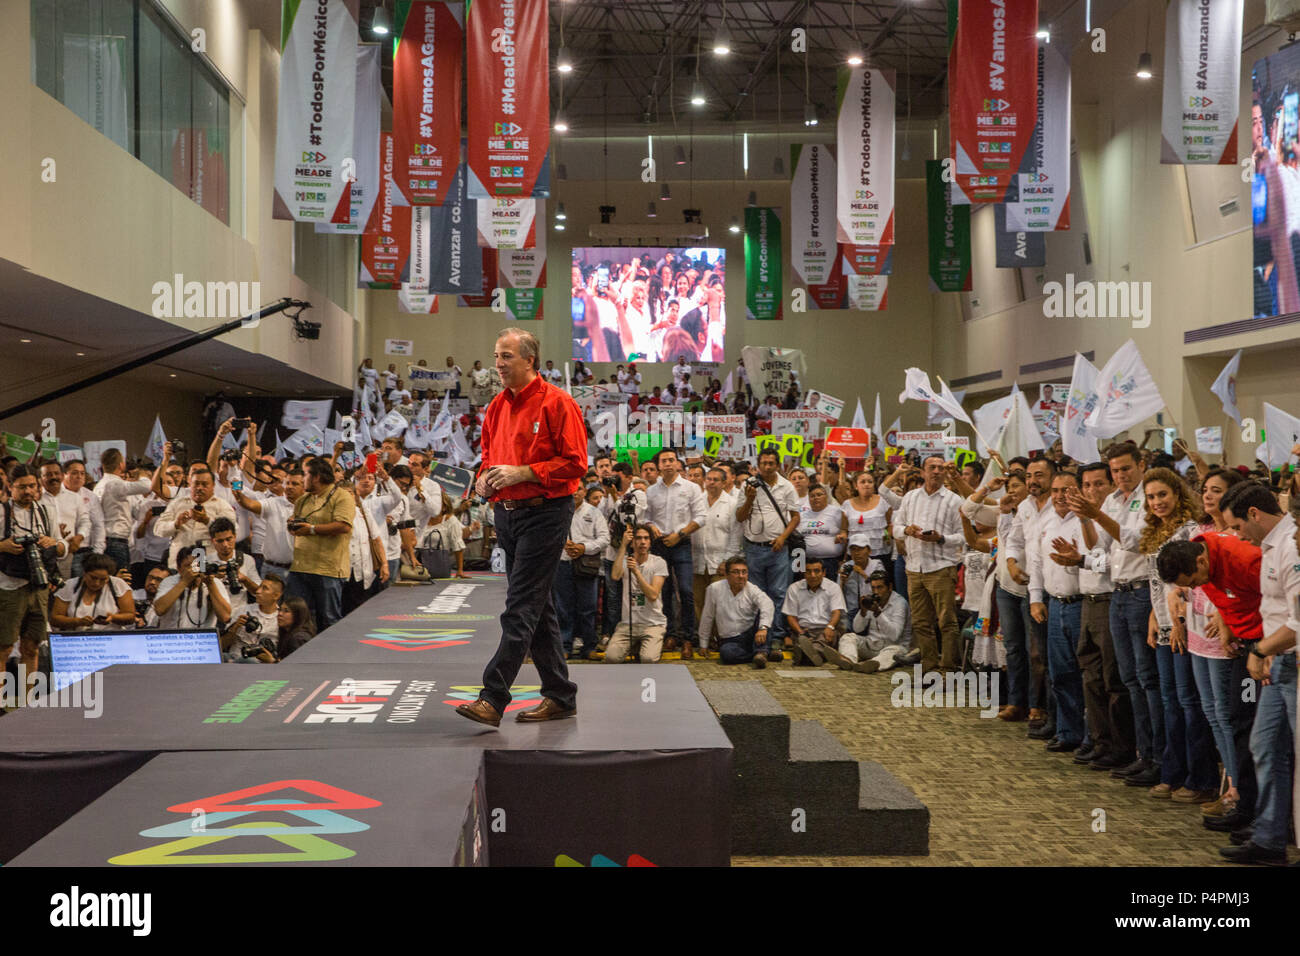 A campaign event for JosŽ Antonio Meade leader of the Institutional Revolutionary Party (PRI) and candidate for the presidential elections, May 27, 2018, Campeche, Mexico. Stock Photo